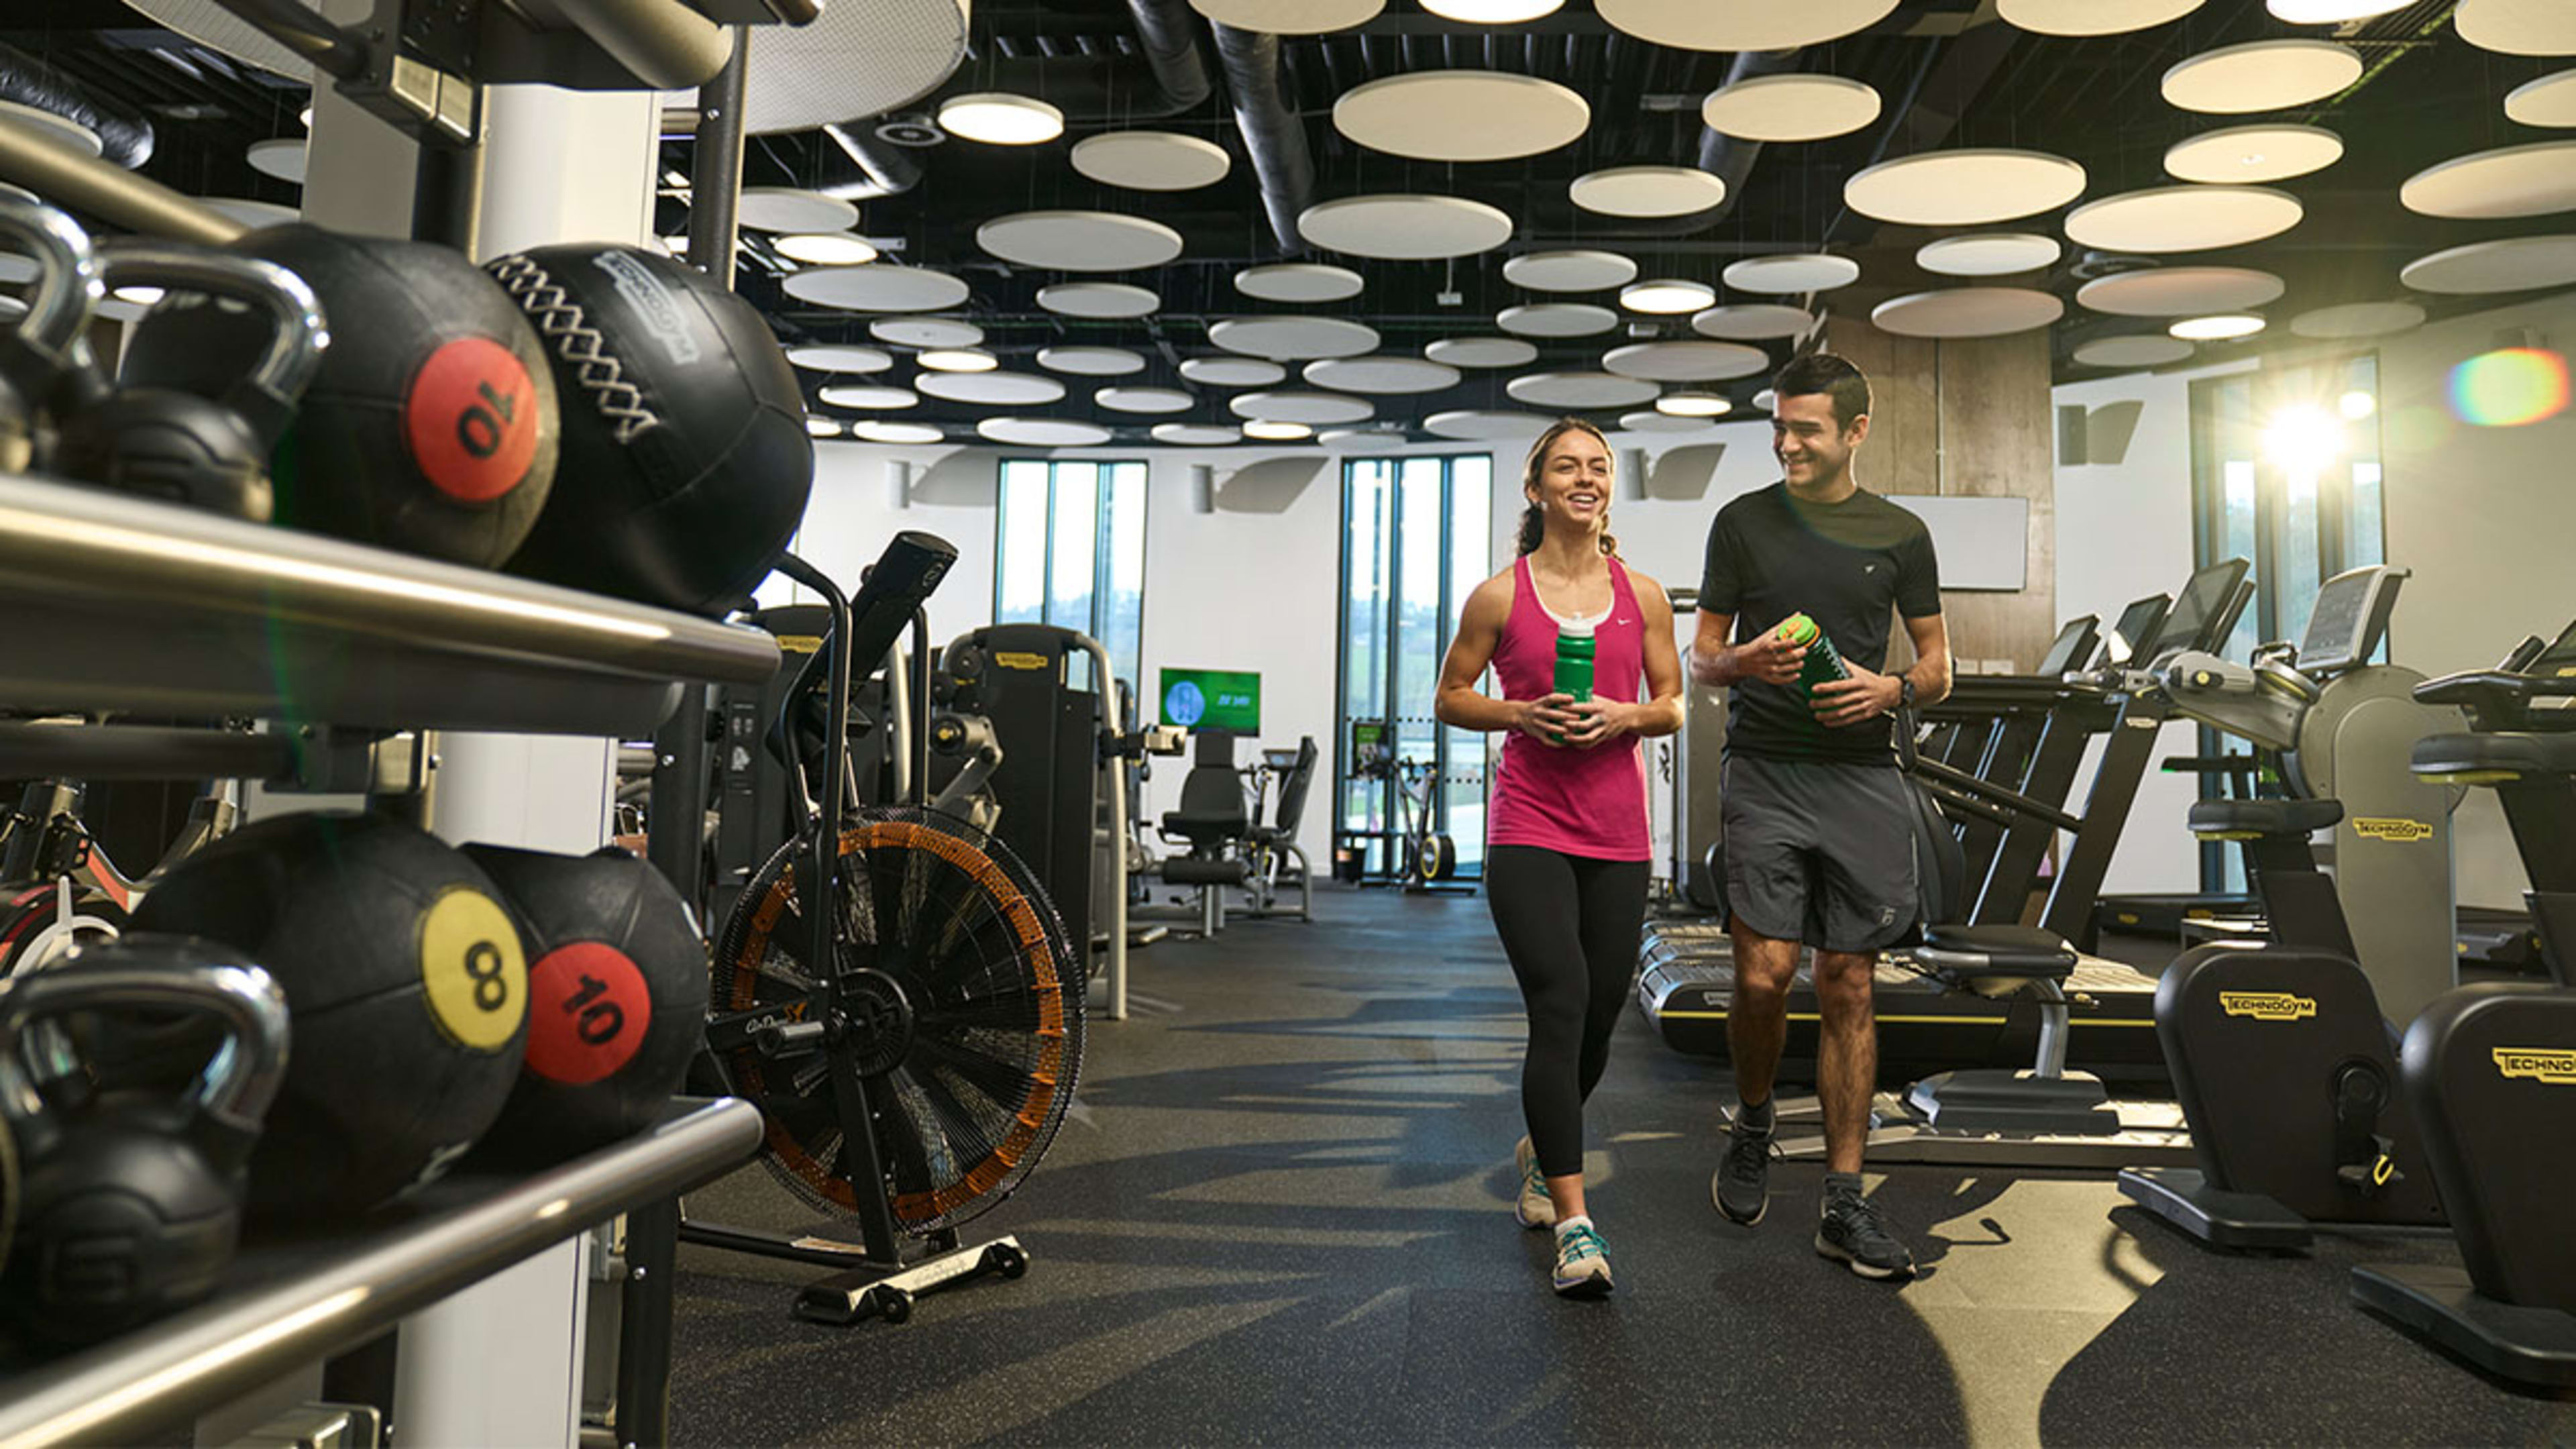 Gym equipments at INTO University of Stirling